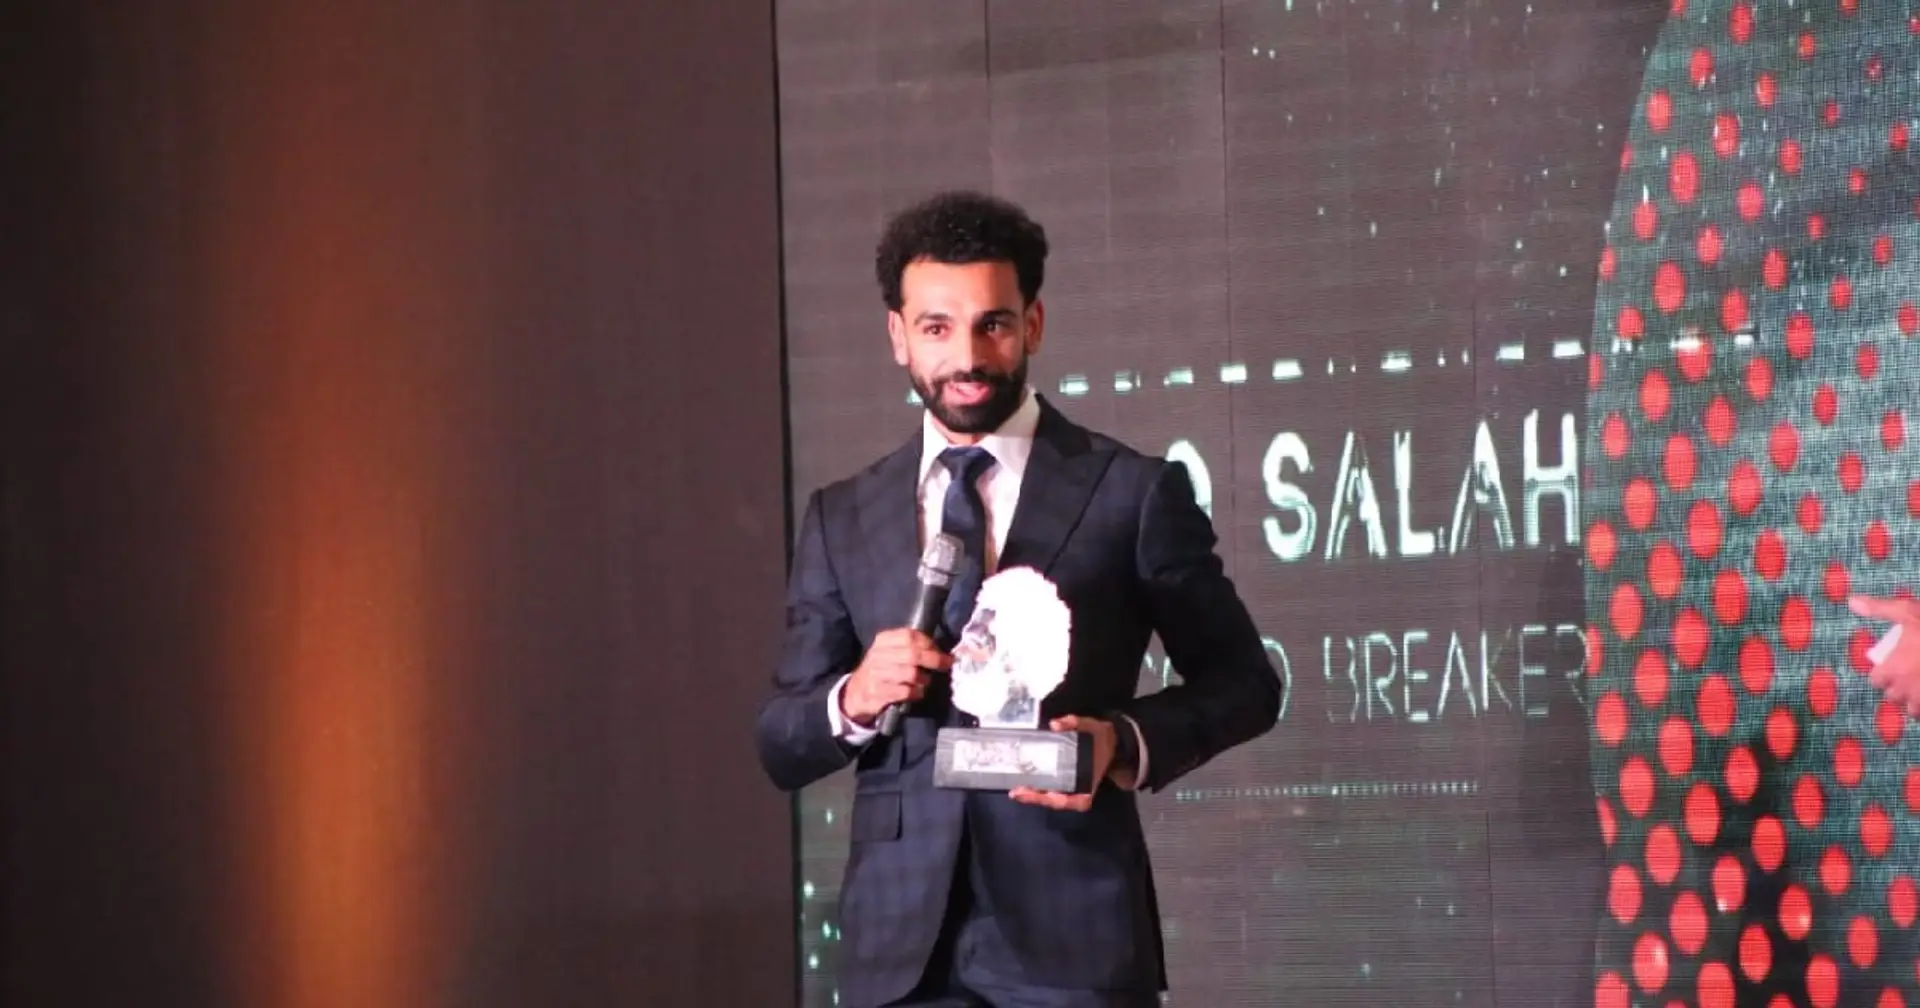 Mo Salah reveals 2 key men in his career after being awarded the 'Inspirer Award' by Egyptian FA